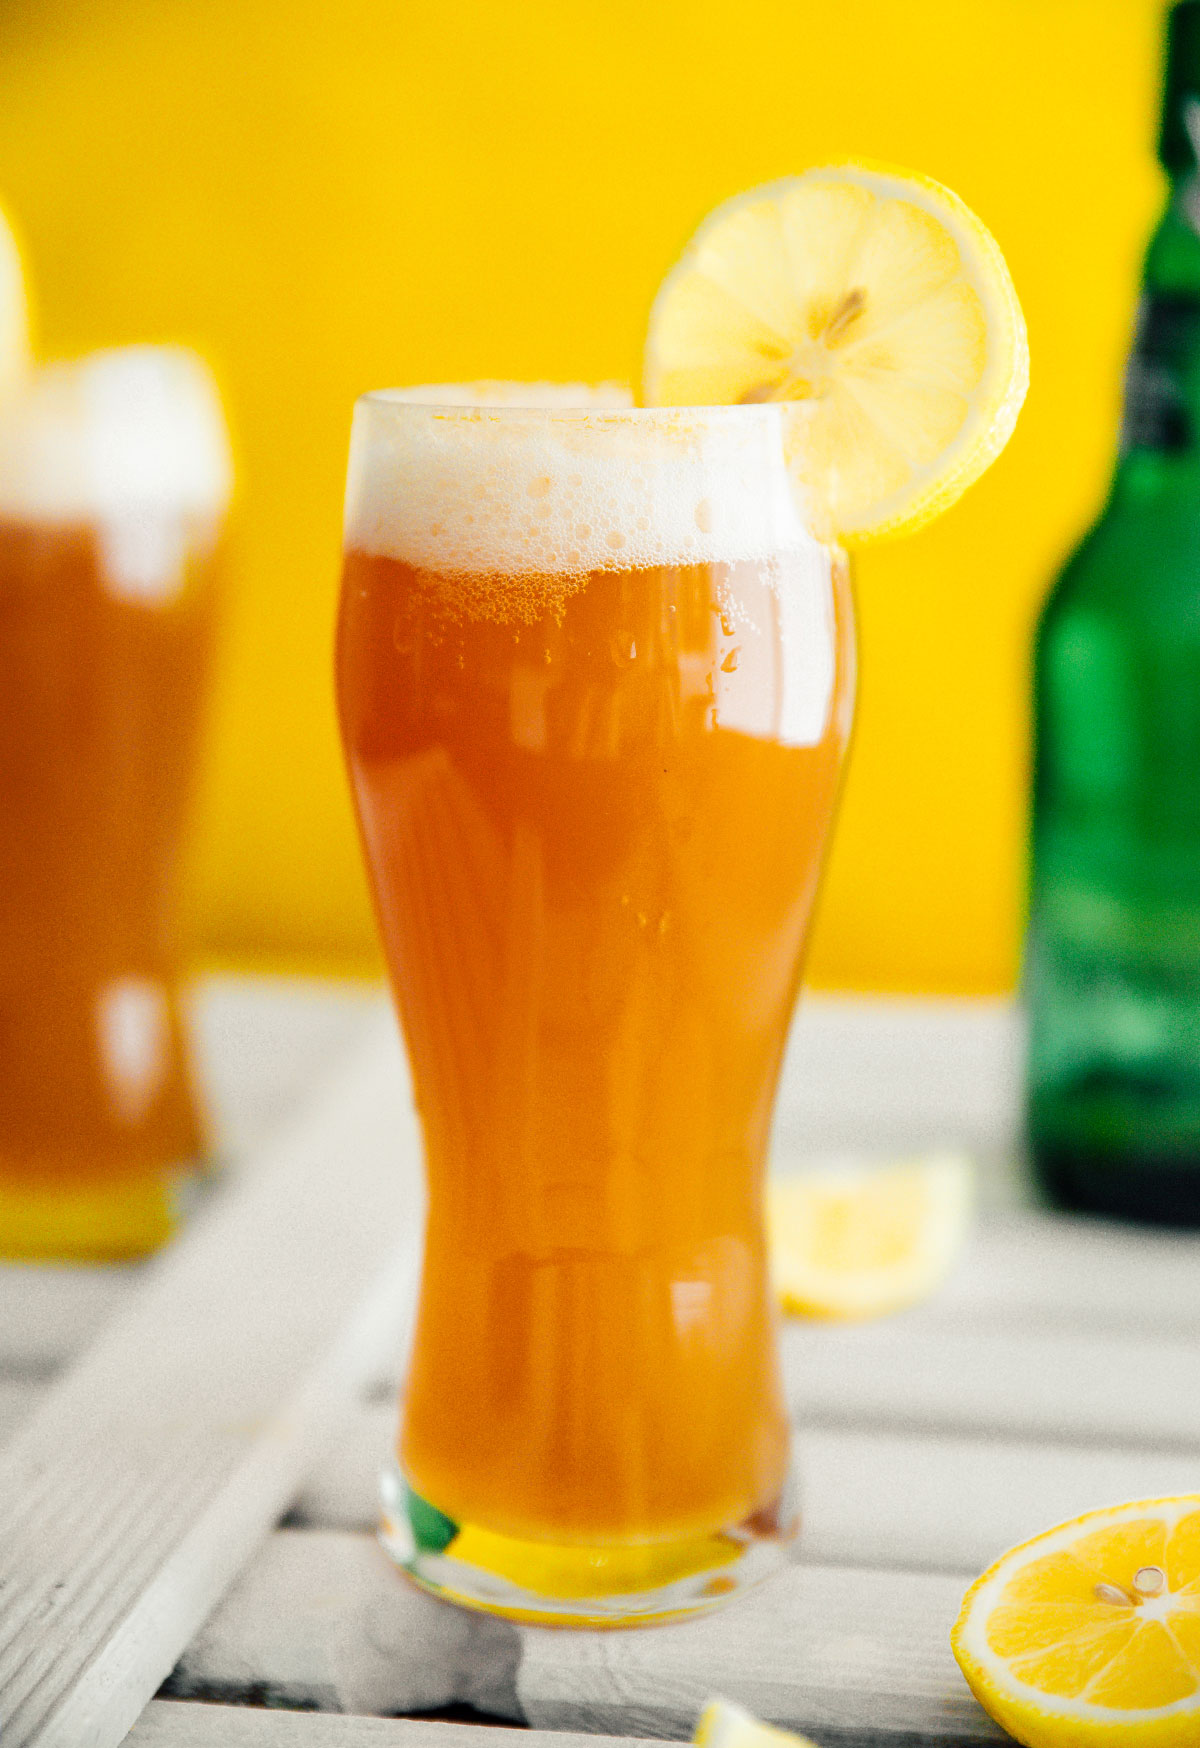 Kombucha beer shandy in a glass with a lemon